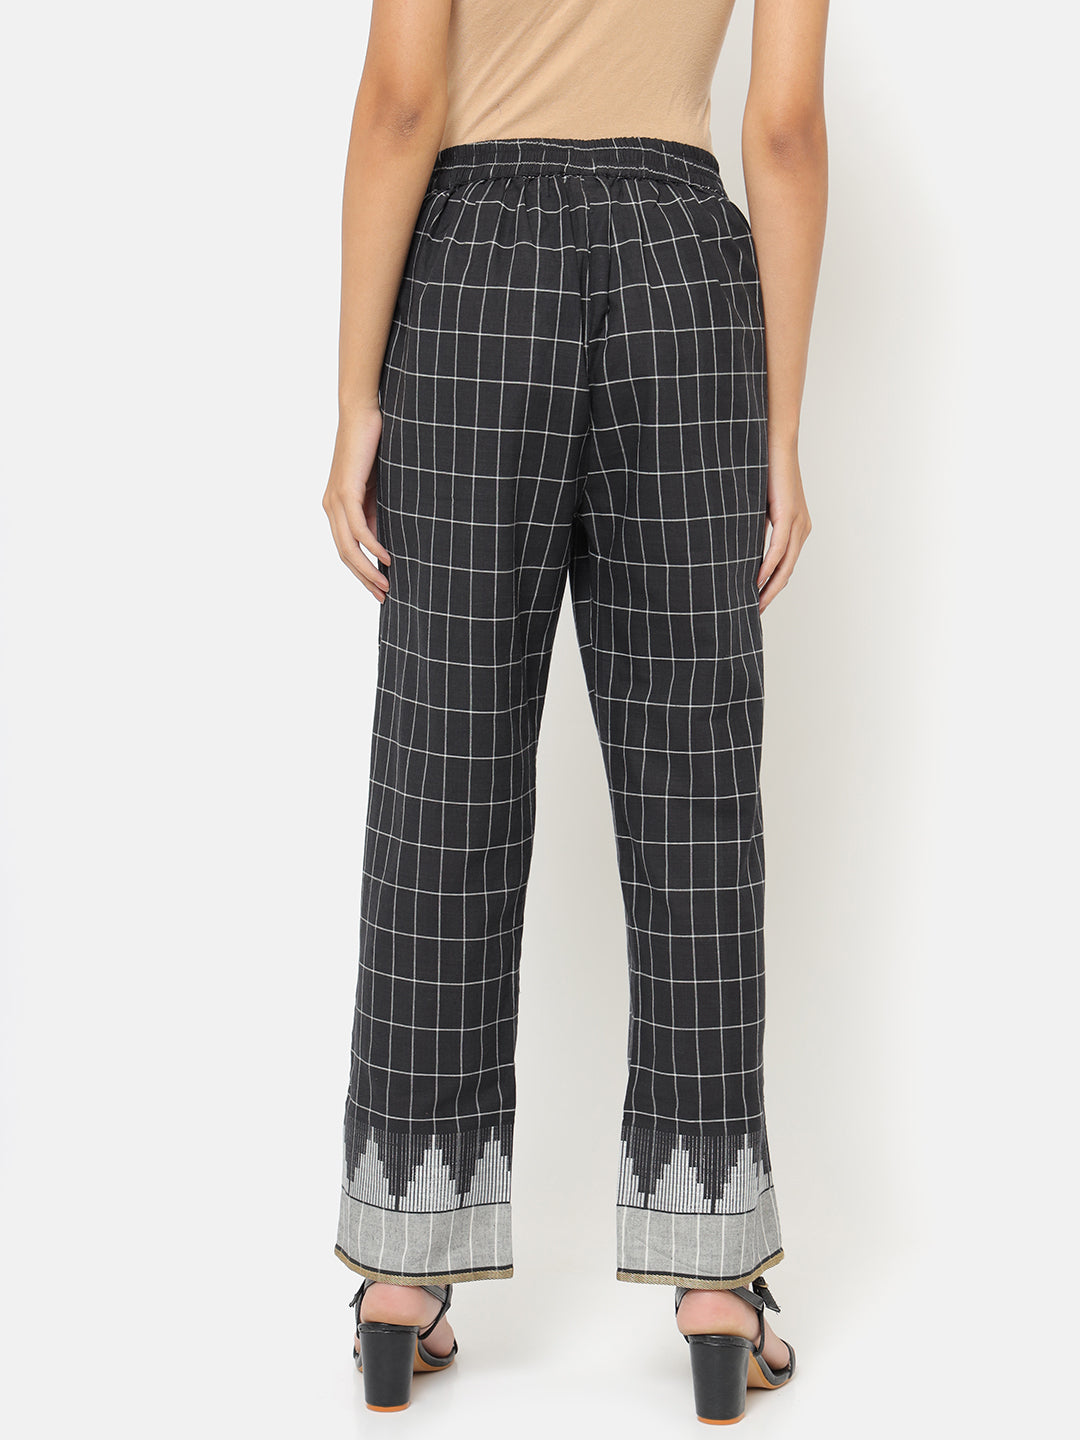 Weaves of South Black Tapered Pant (7490107801831)